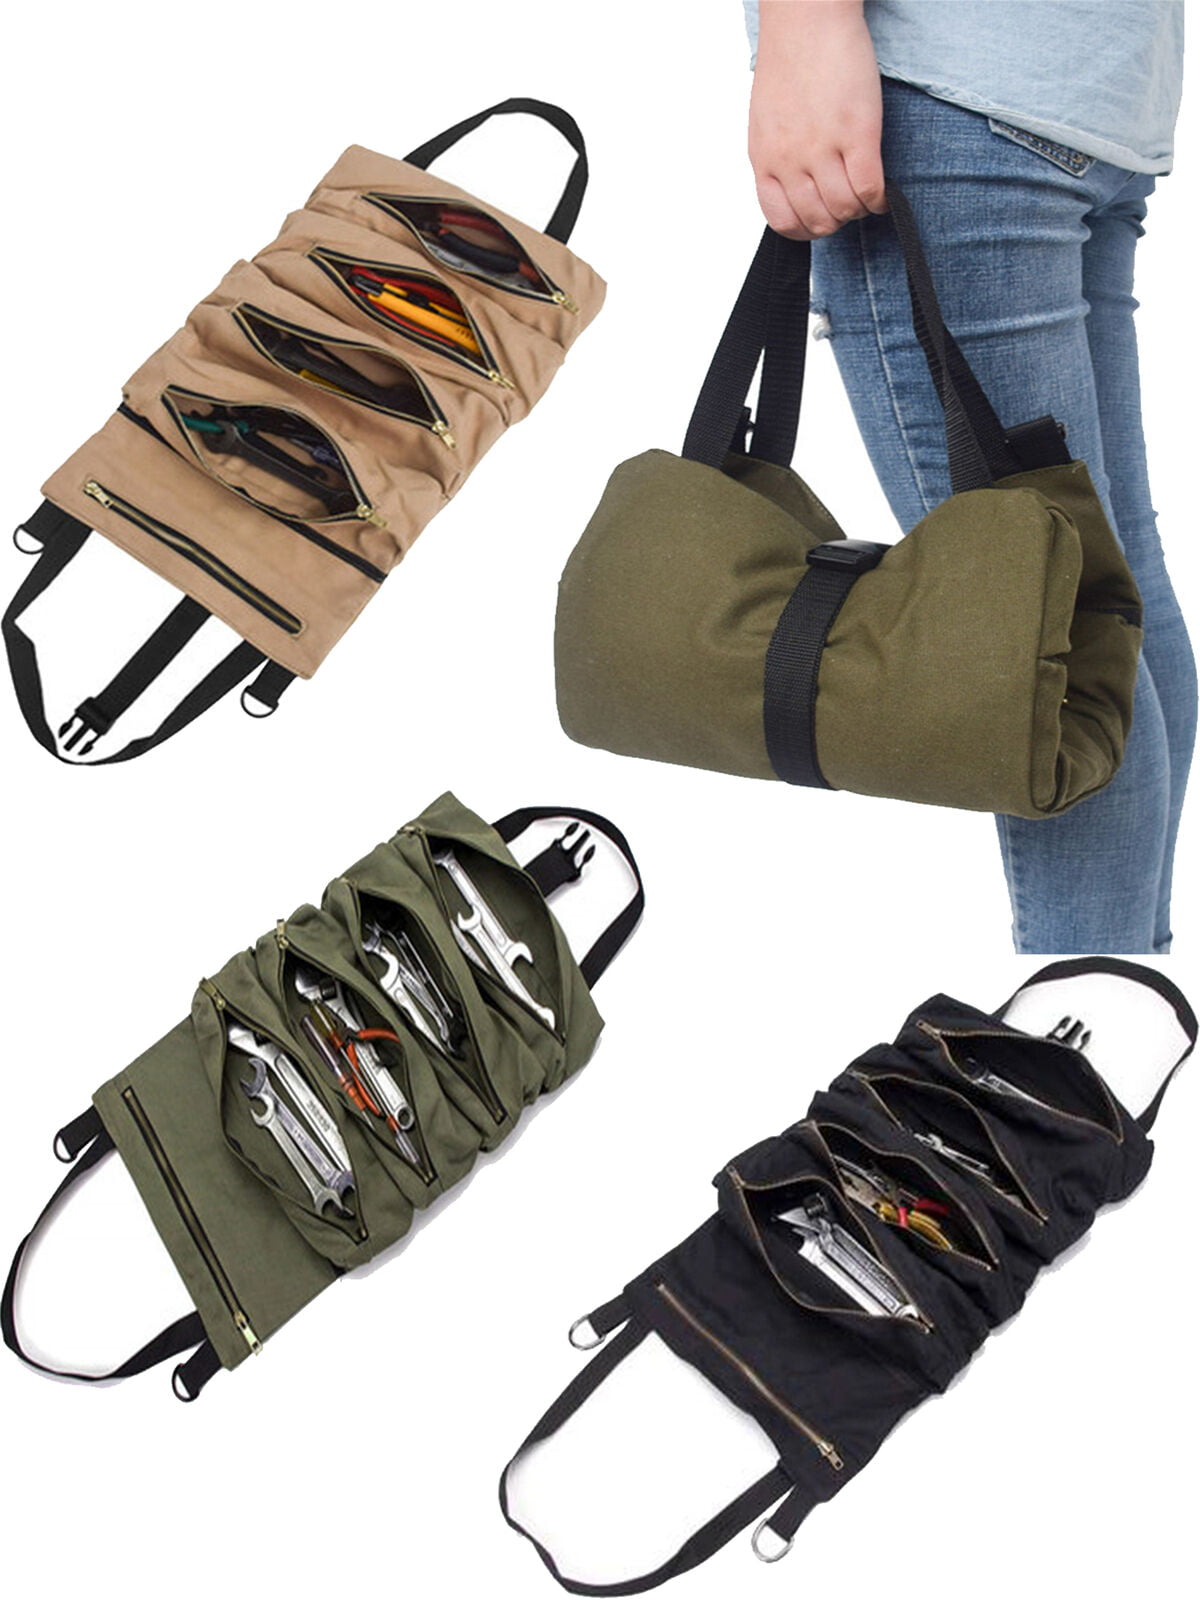 Portable Canvas Pocket Tool Roll Spanner Wrench Waterproof Tool Bag Case Zipper 